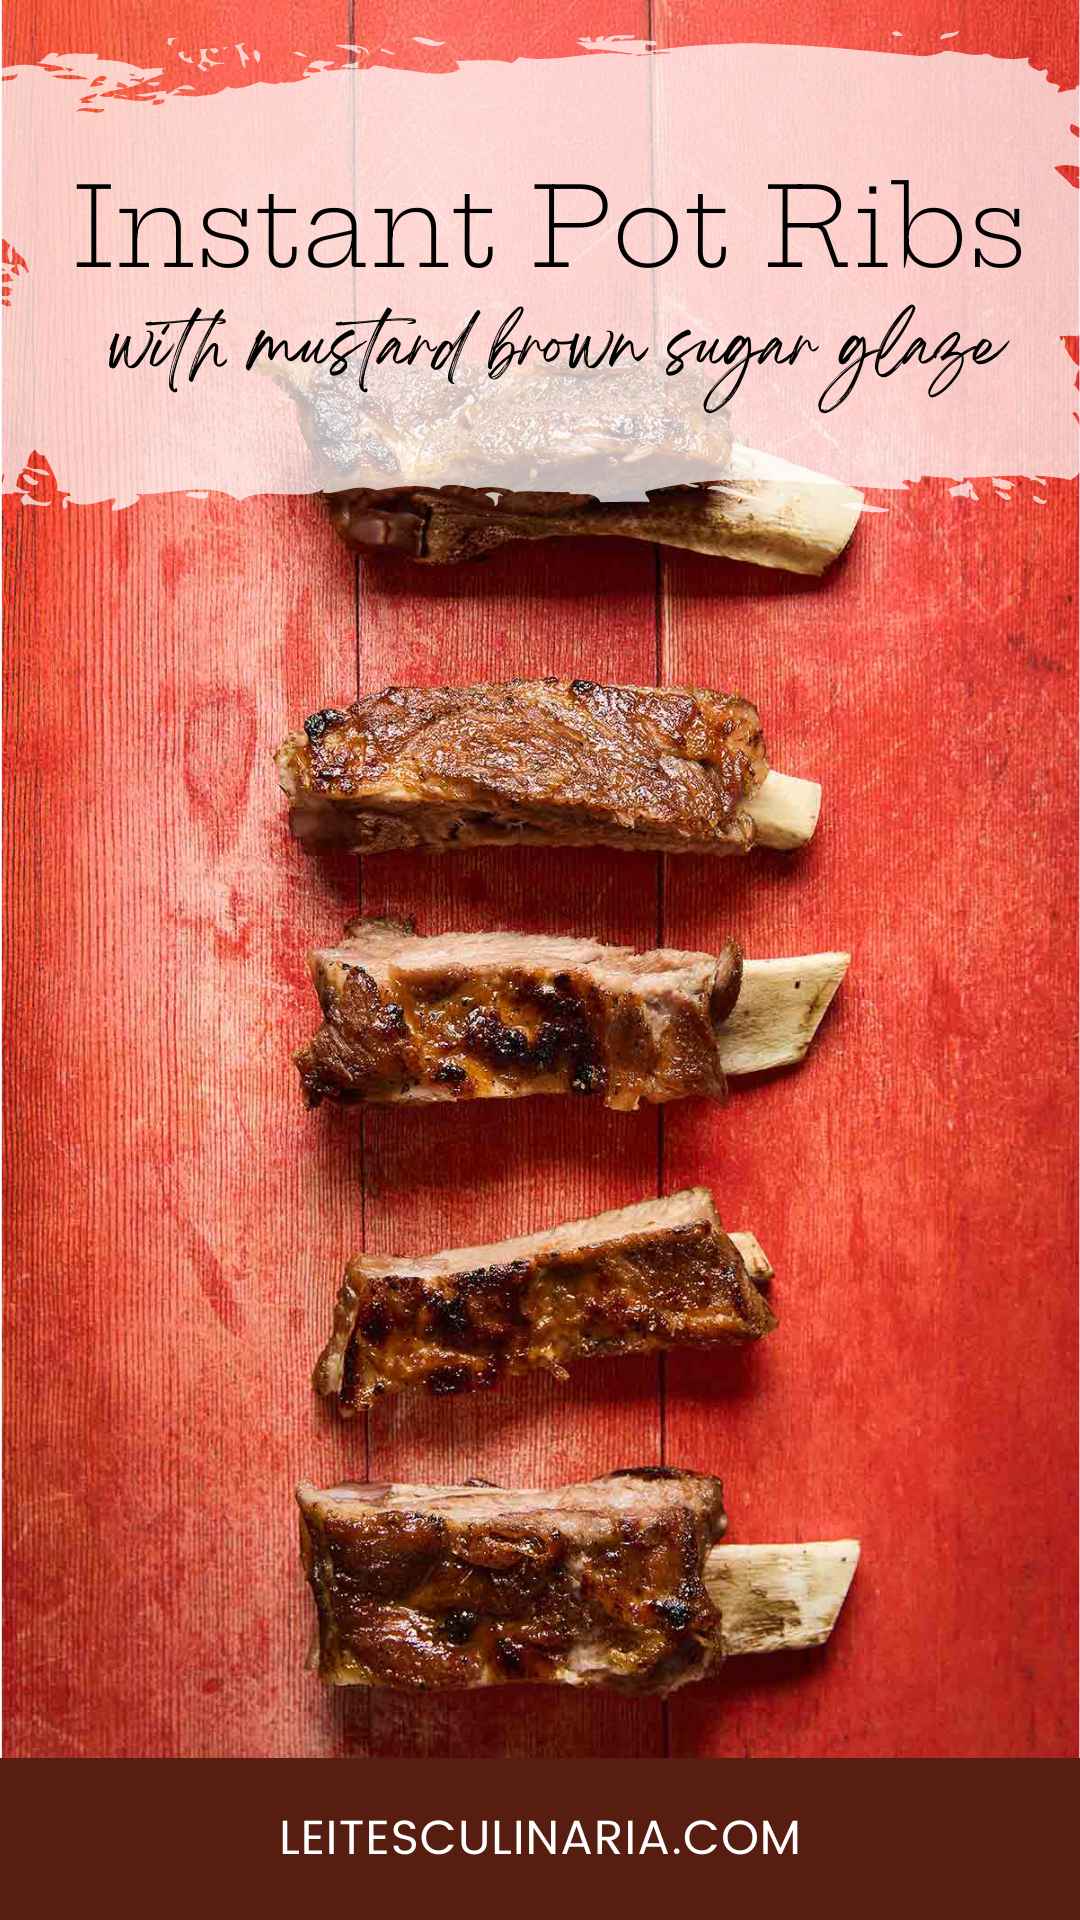 Five individual cooked spare ribs lined up on a red wooden board.